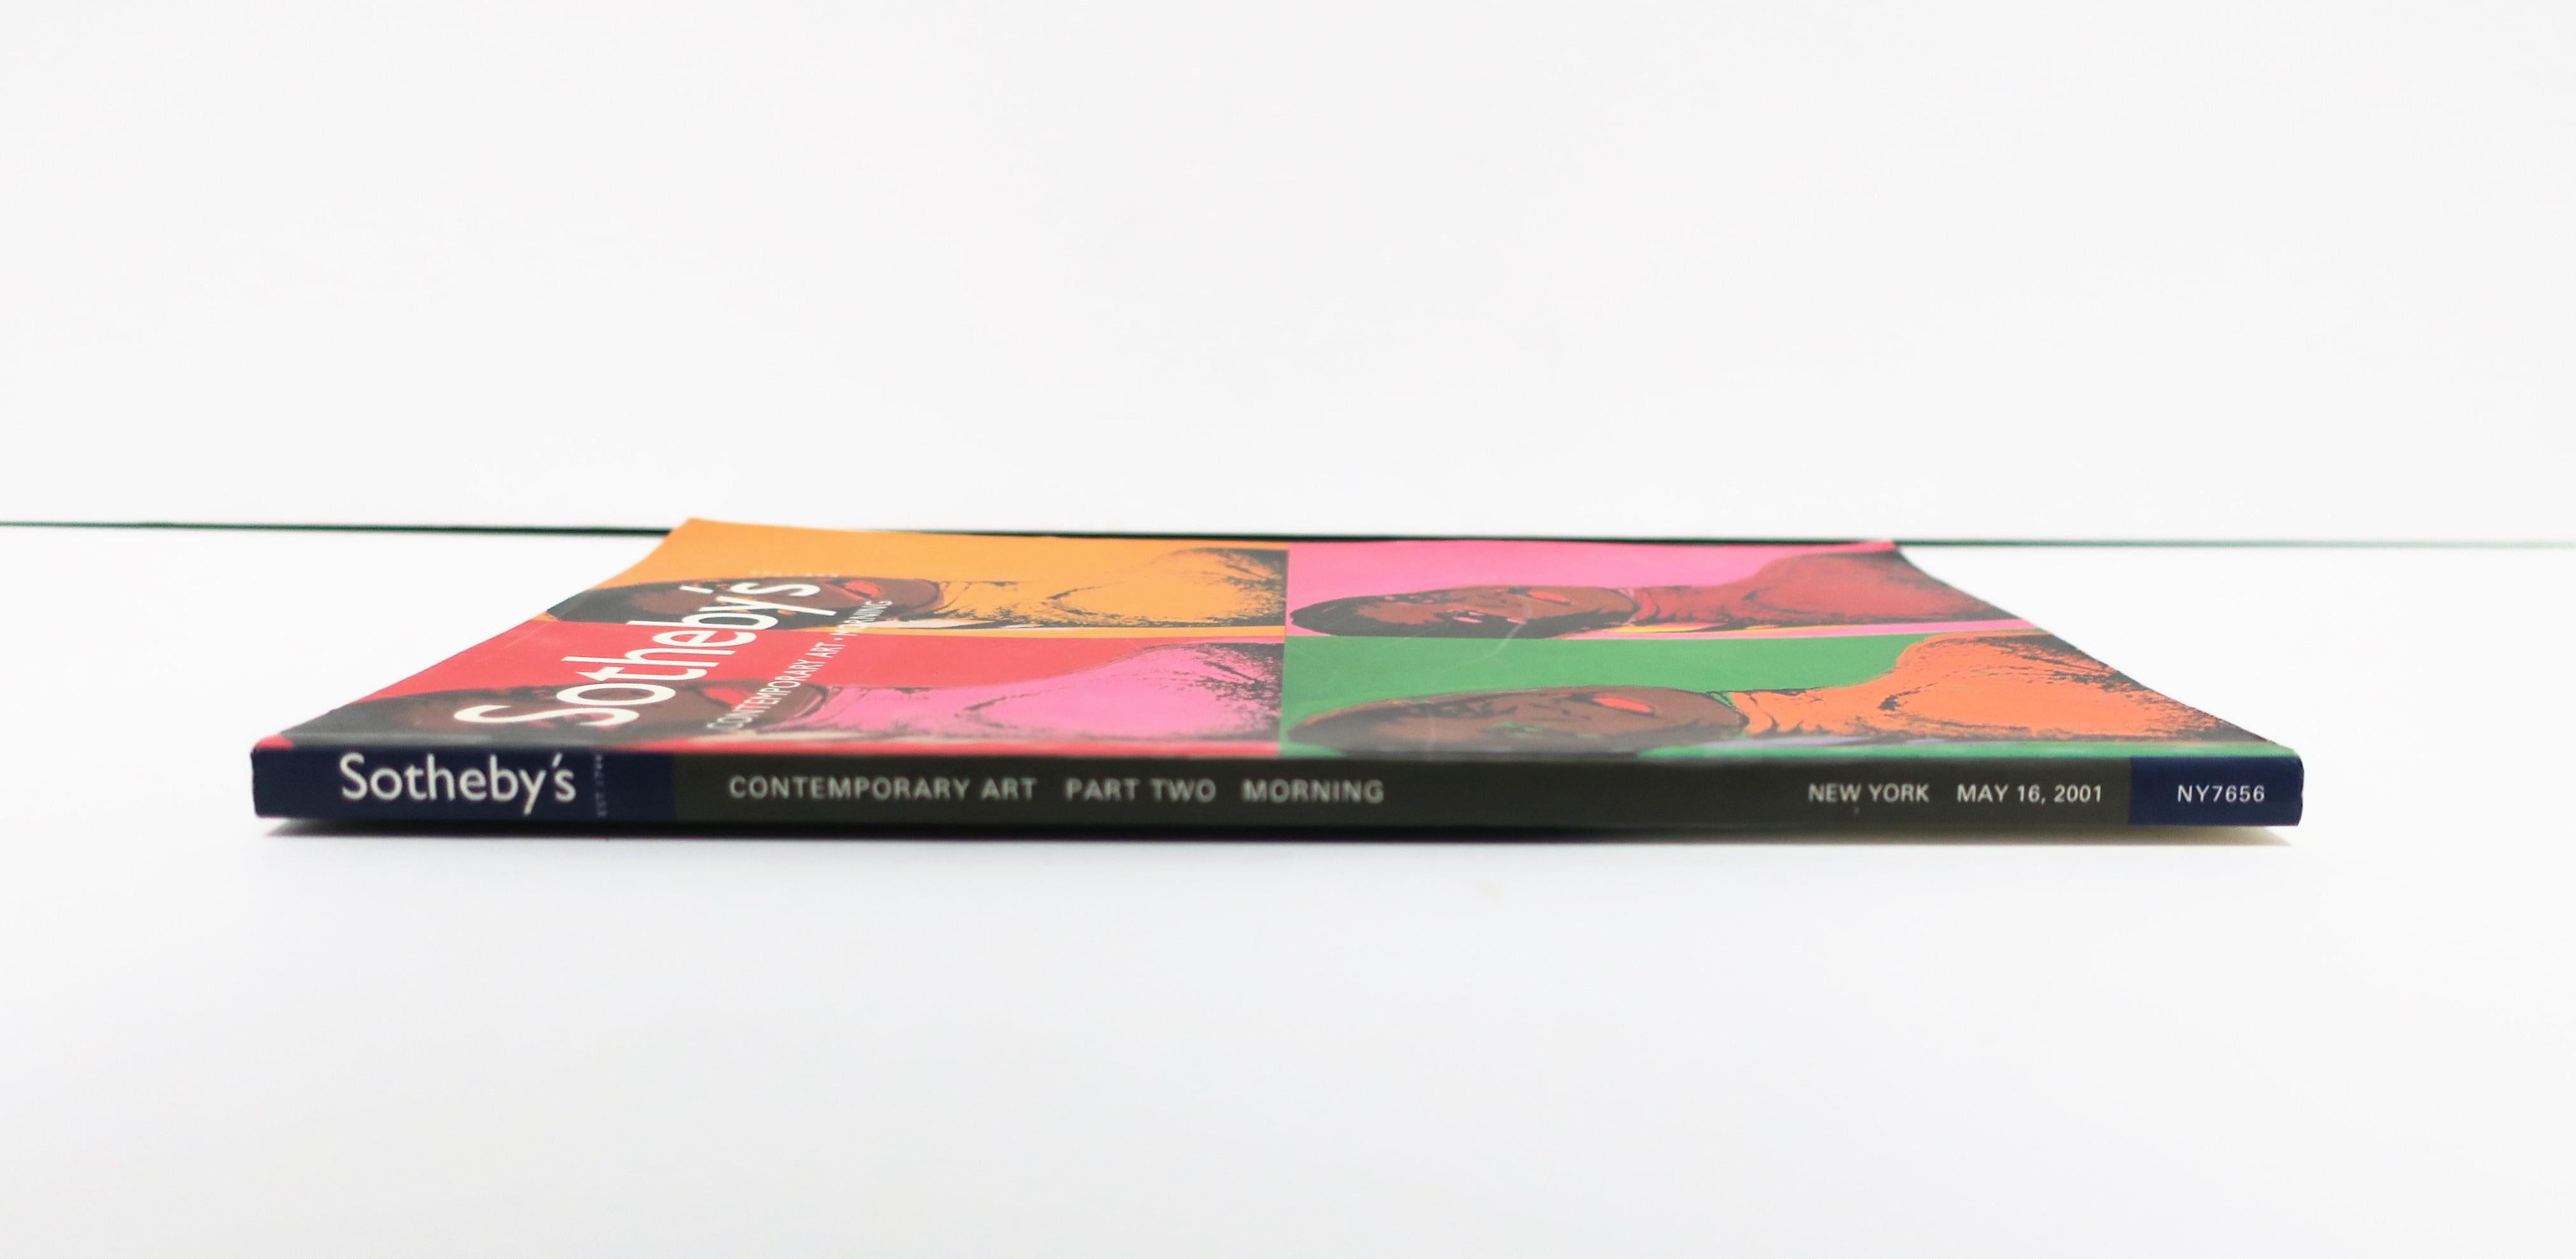 Paper Warhol Cover Contemporary Art Sotheby's New York Catalog Book, 2001 For Sale